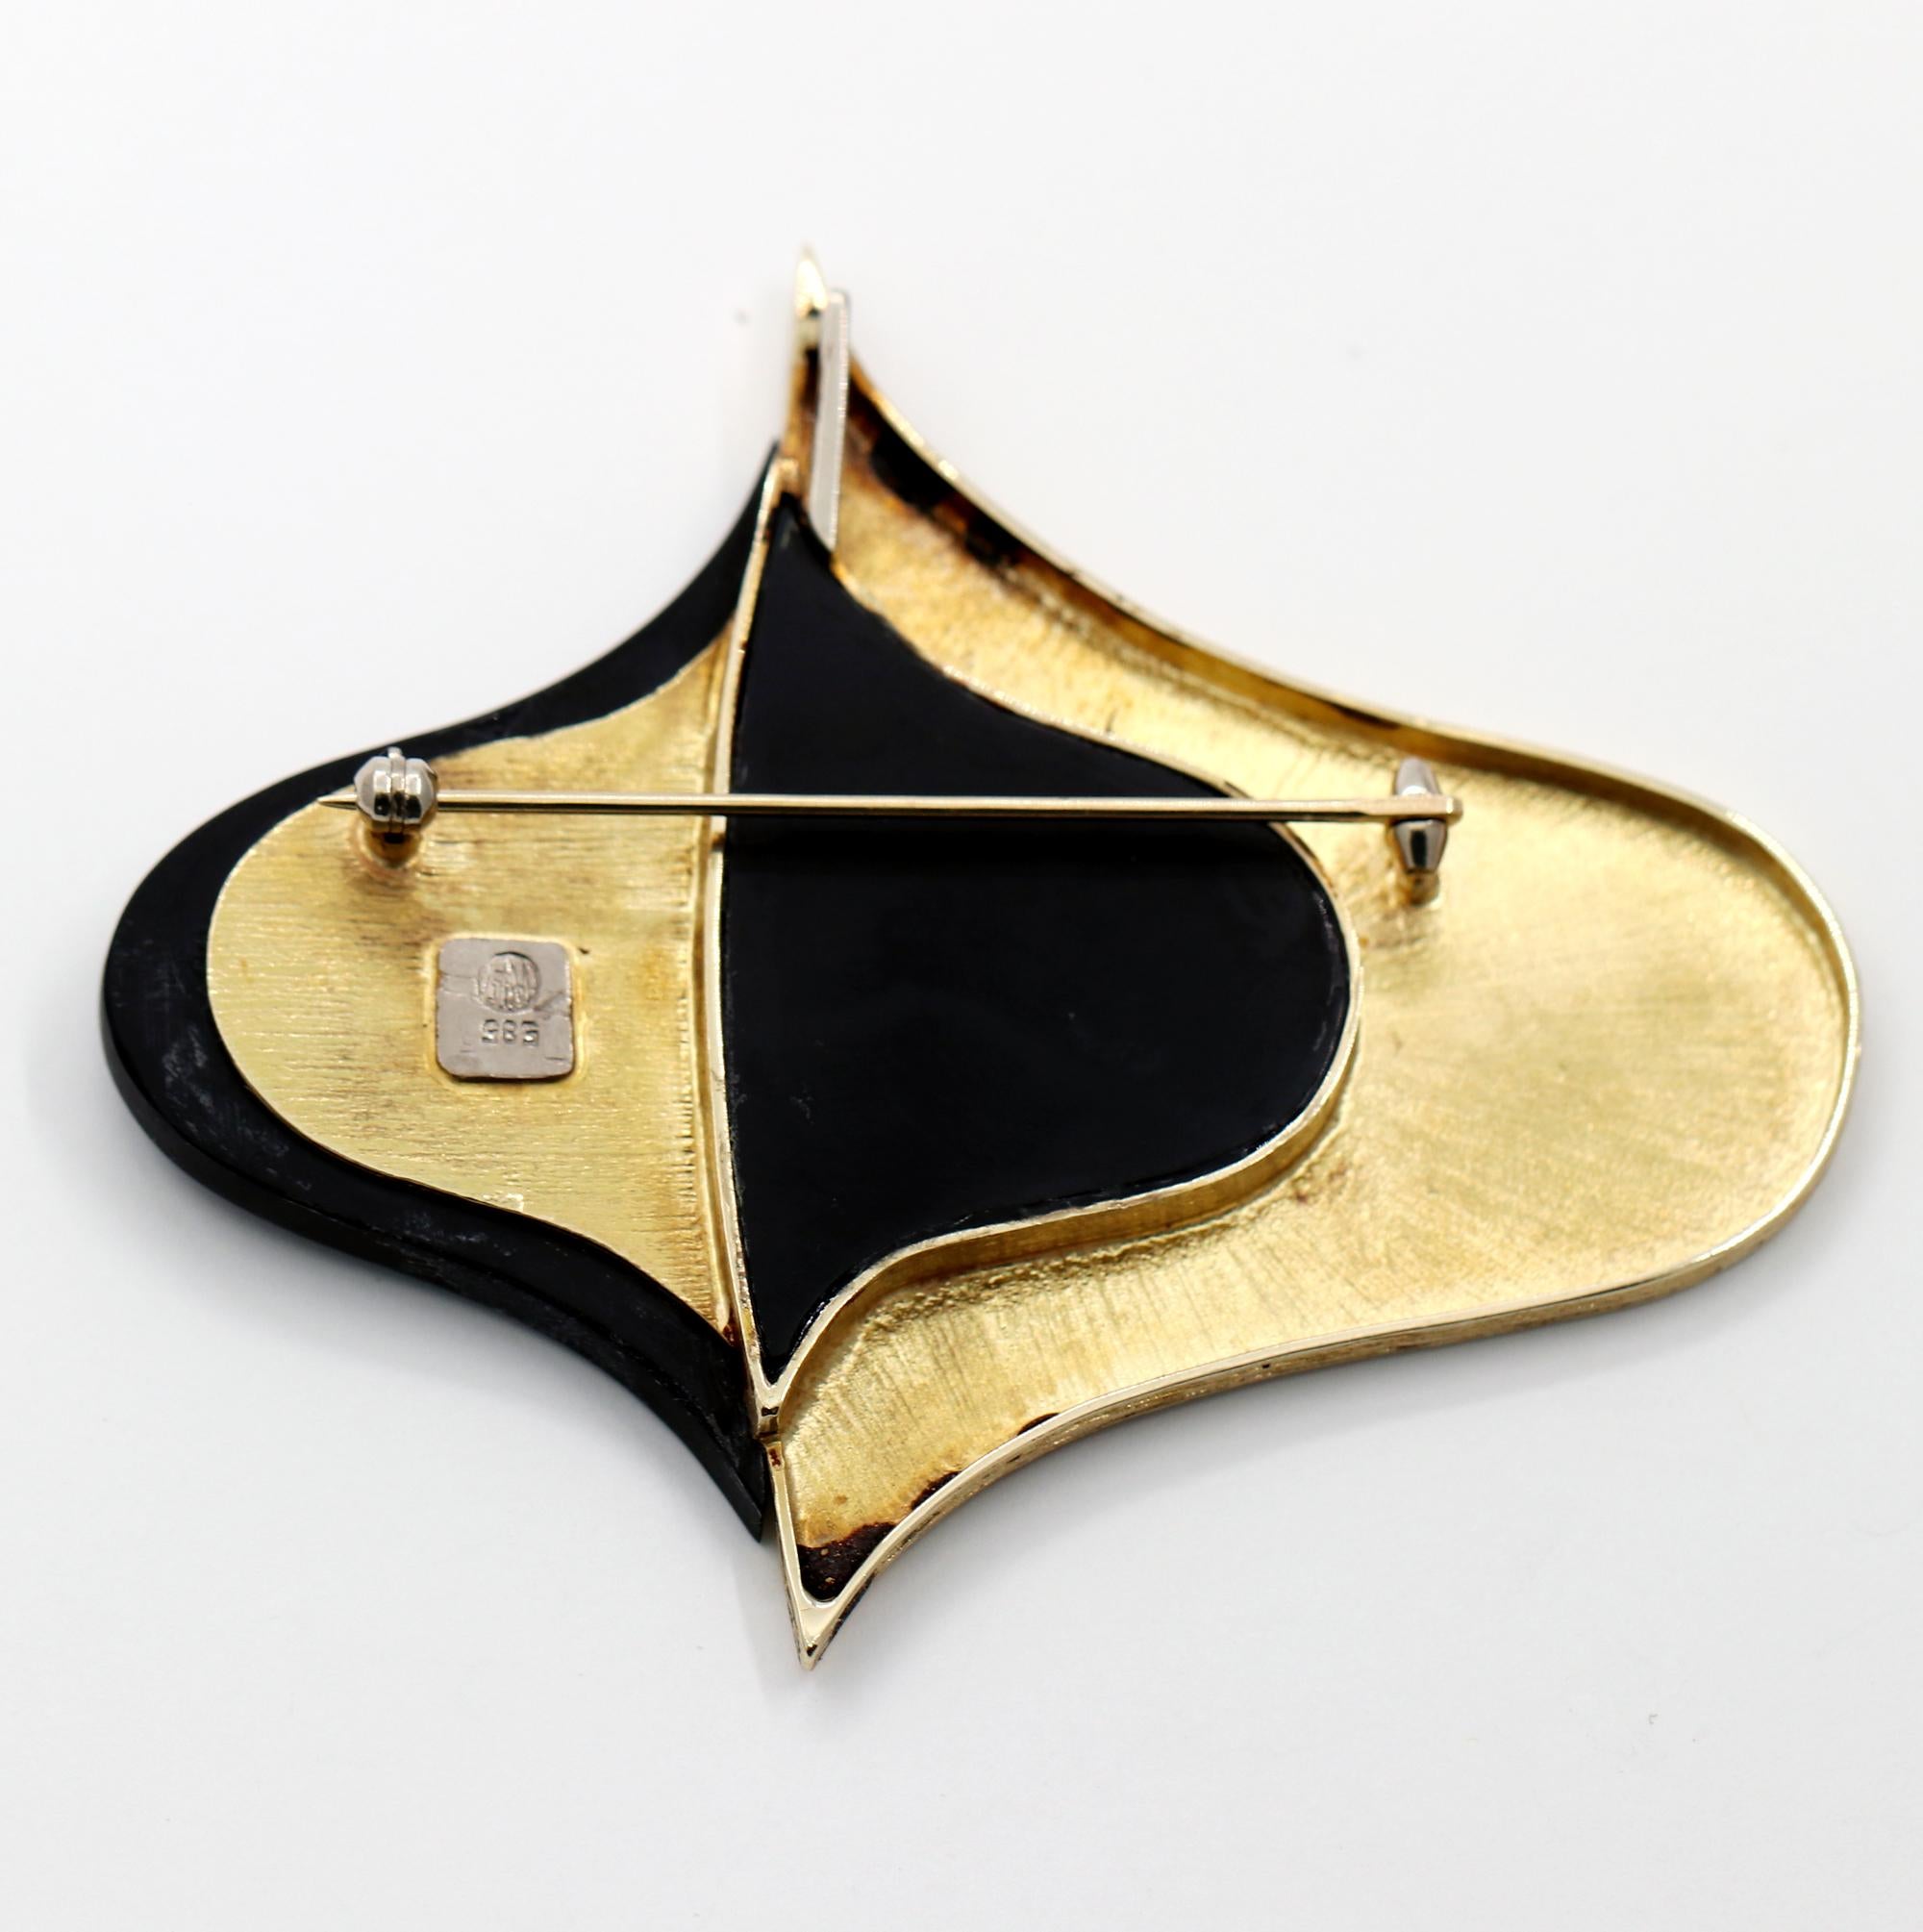 This very large scale mid-20th century Modernist brooch is 
completely organic in form and incorporates different levels 
that add tremendous interest to the design. It is crafted from 
14k yellow gold and black onyx. Measures 3 inches by 
2 5/8